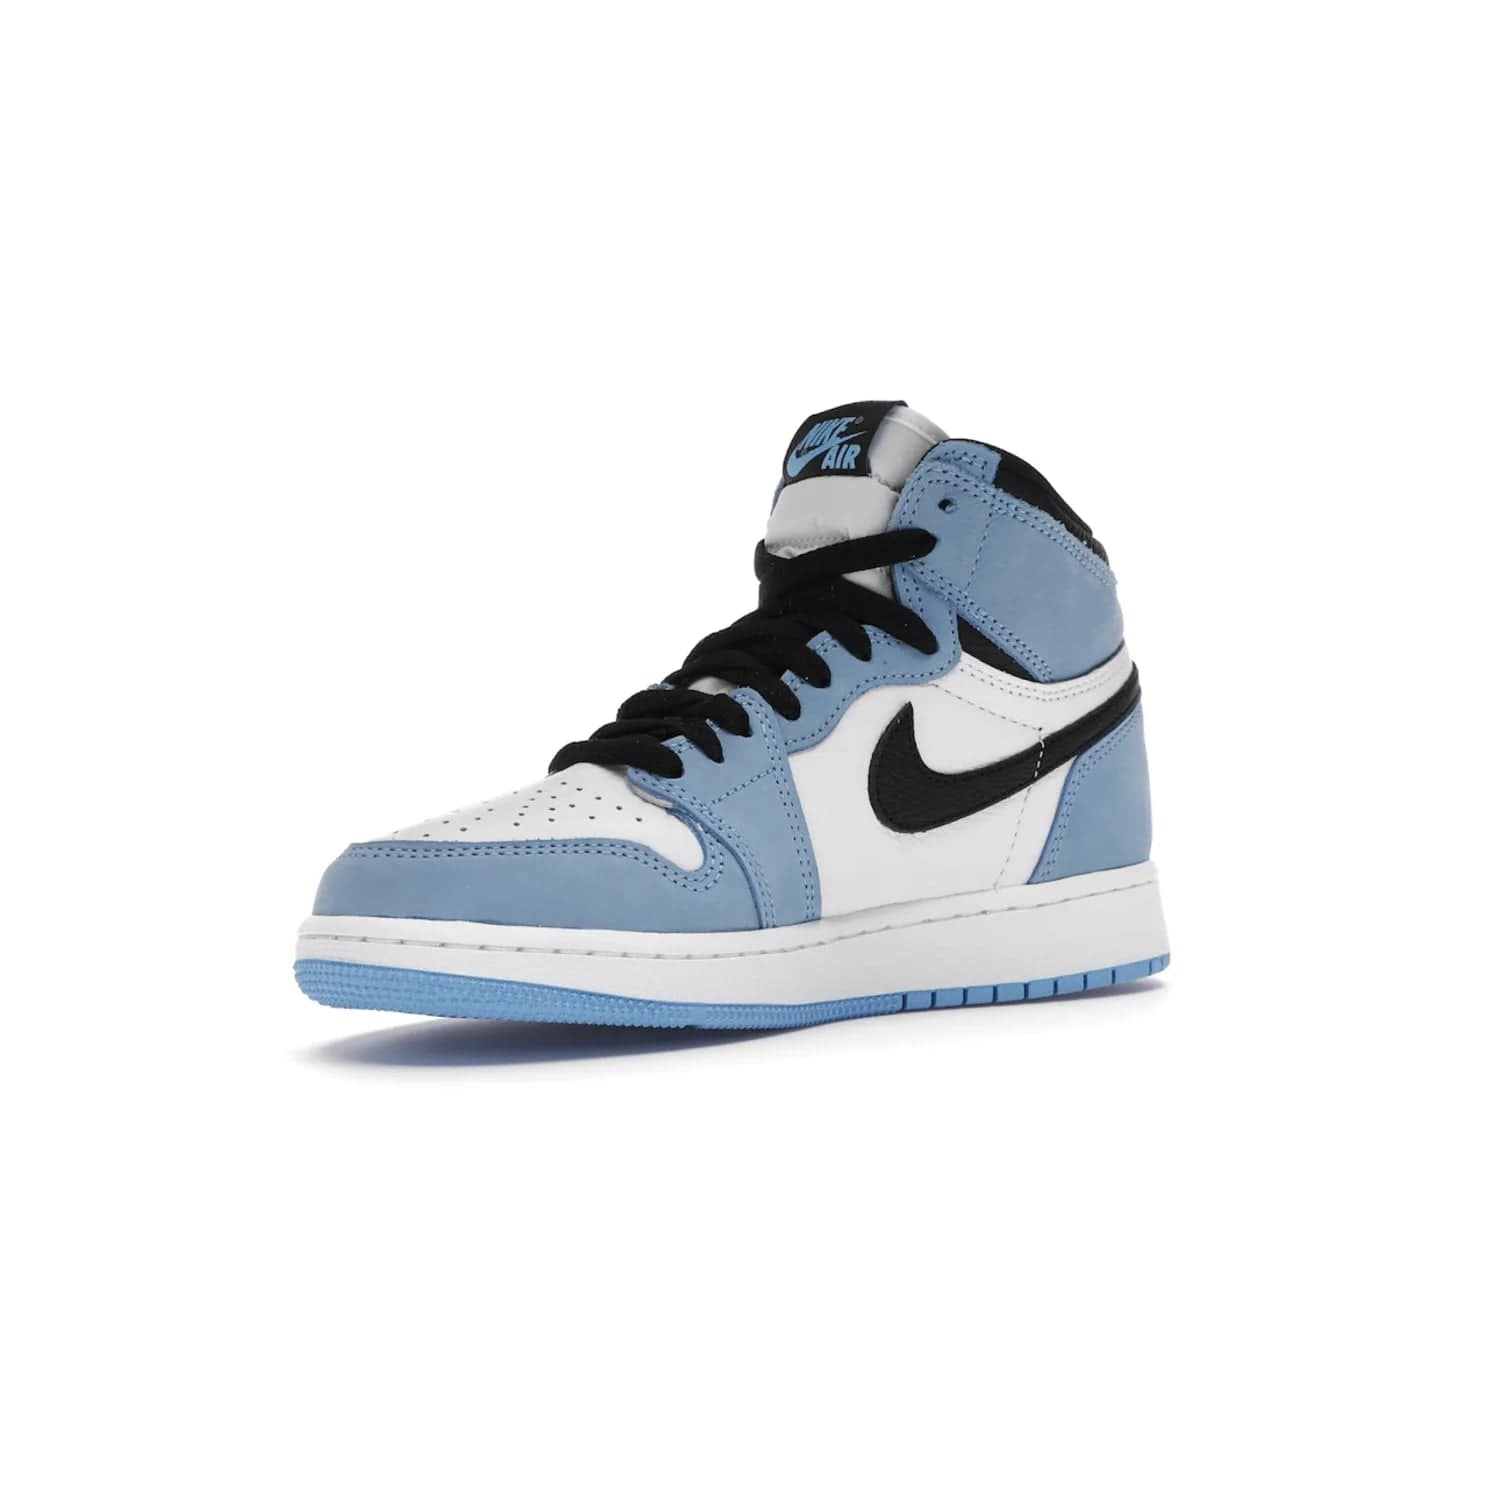 Jordan 1 Retro High White University Blue Black (GS) - Image 15 - Only at www.BallersClubKickz.com - Air Jordan 1 Retro High White University Blue Black GS: the latest offering from the iconic Air Jordan 1 line. White tumbled leather upper with University Blue overlays and black detailing. University Blue outsole and white midsole. March 6 release.